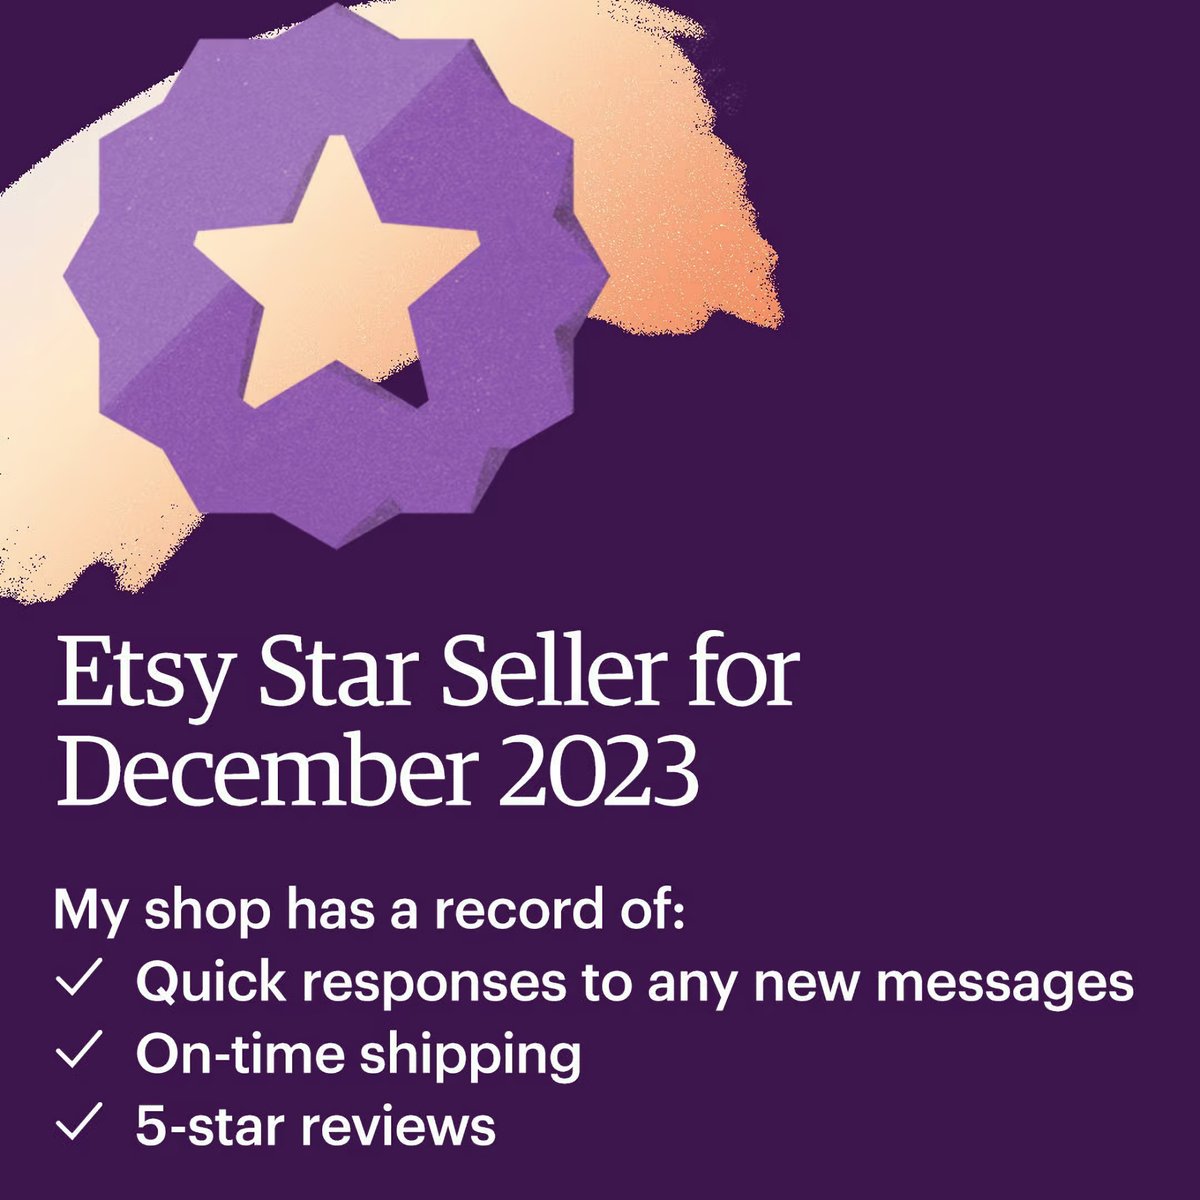 I’m a Star Seller on Etsy this month!  That means you can purchase from my Etsy shop knowing I have a record of  providing an excellent customer experience. etsy.me/4a3ropa  #EtsyStarSeller #SycamoreWoodStudio #watercolors #cards #prints #Christmascards #Holidaycards